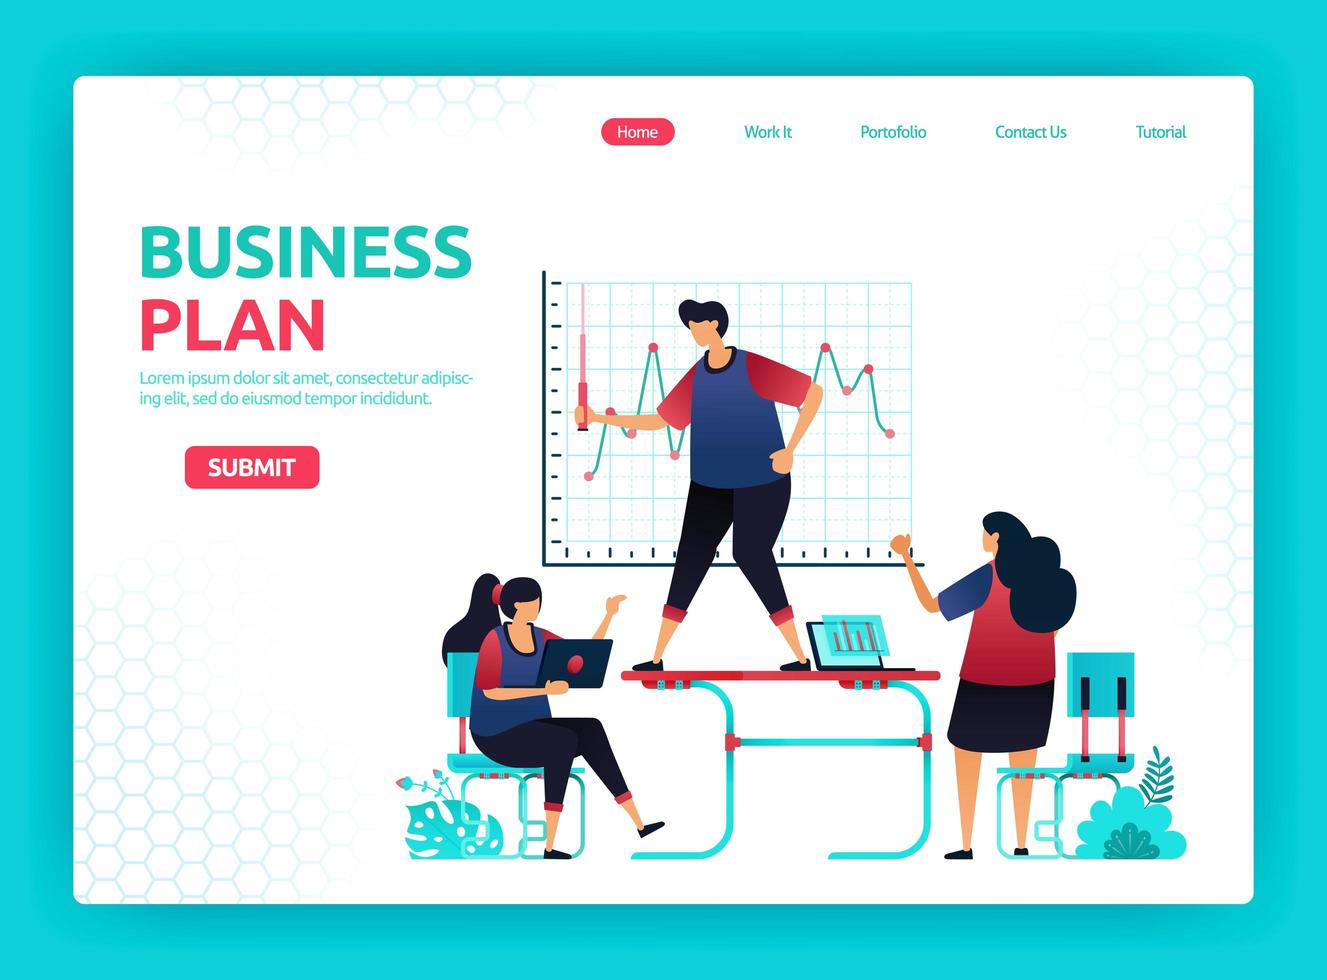 Vector illustration of plan business growth, analysis and development. Meetings and conferences in office with employees. Graphic design template for banner, flyer, brochure, cover, magazine, print